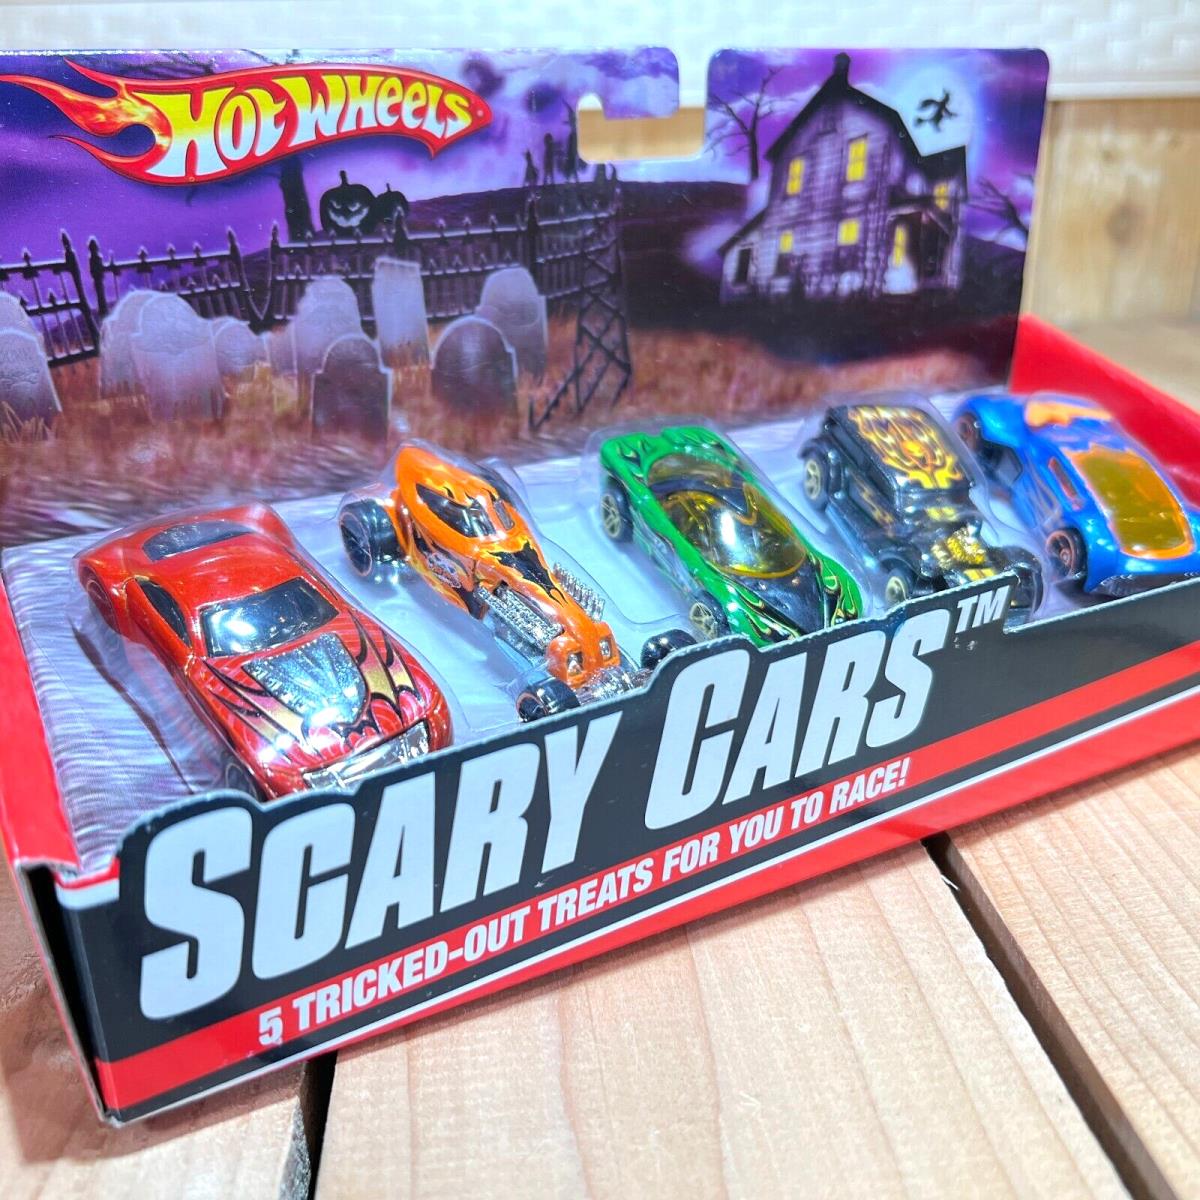 Vintage Hot Wheels Scary Cars Halloween Set Five 1:64 Diecast Cars